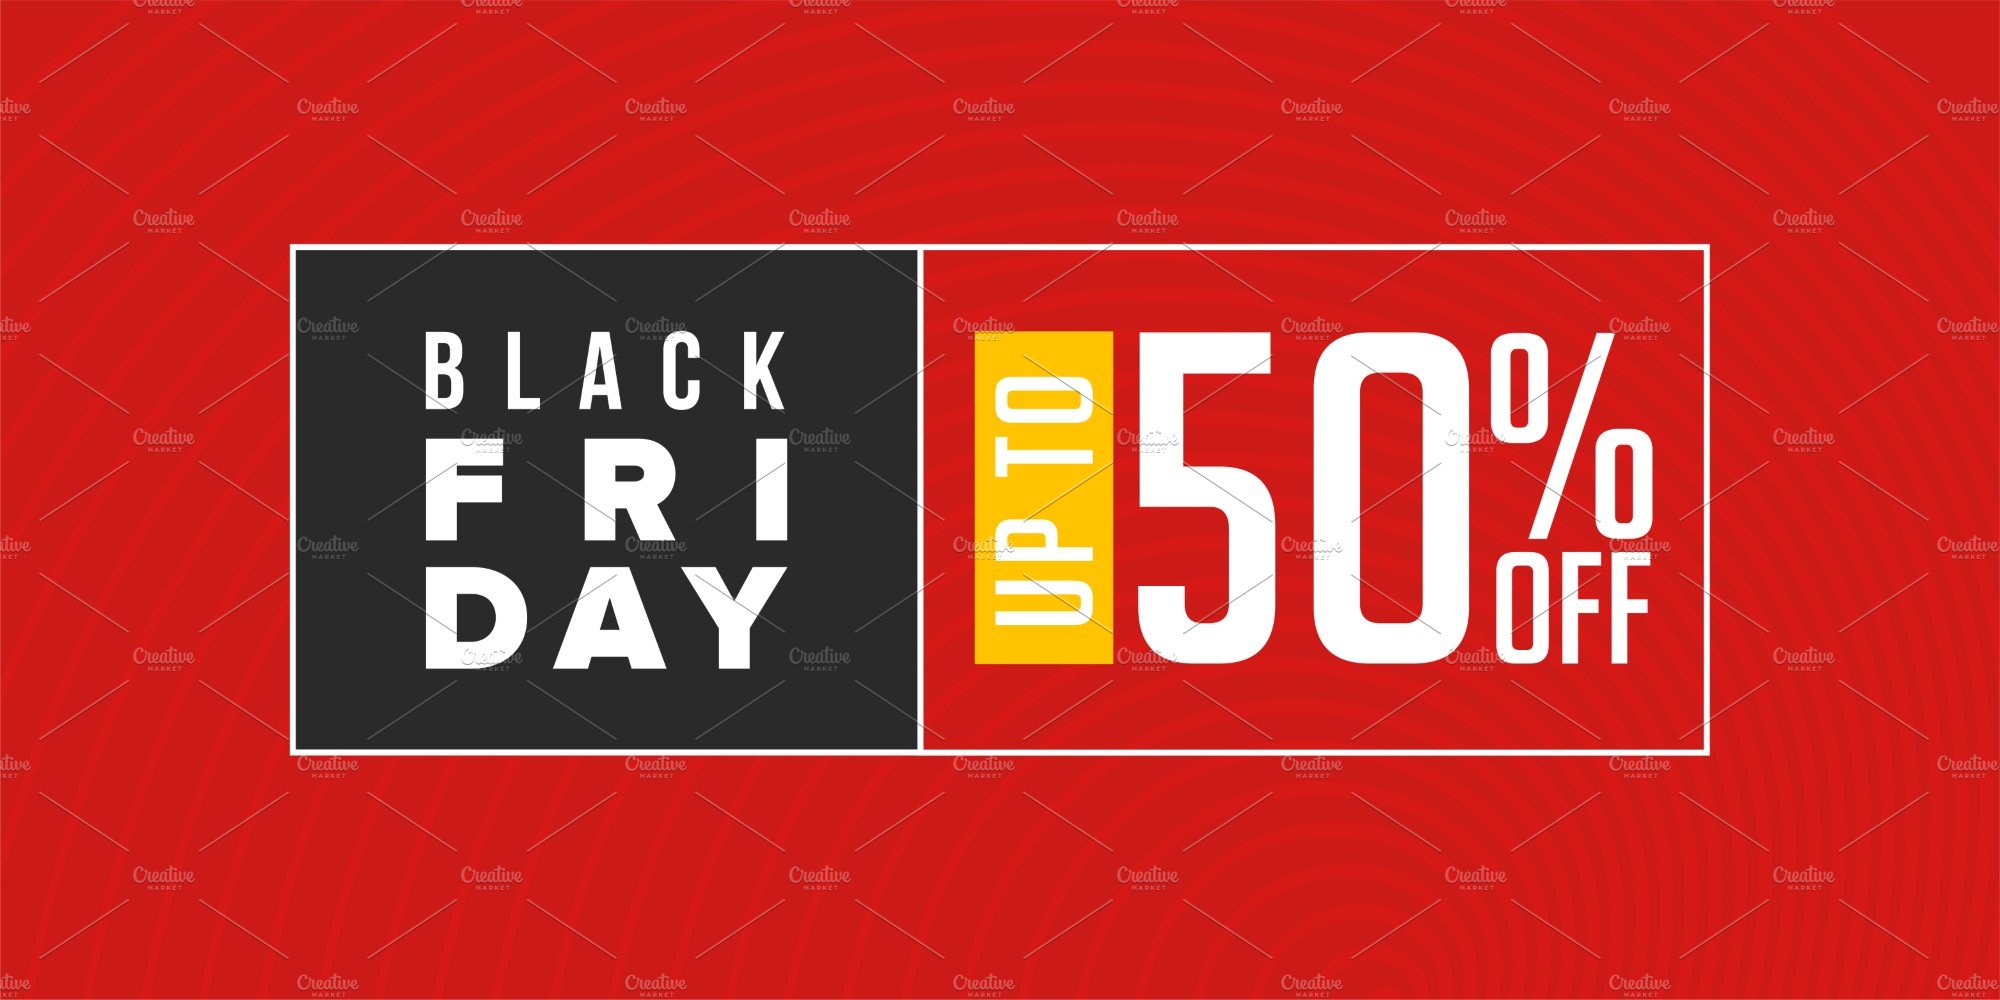 Red banner with creative Black Friday's design.